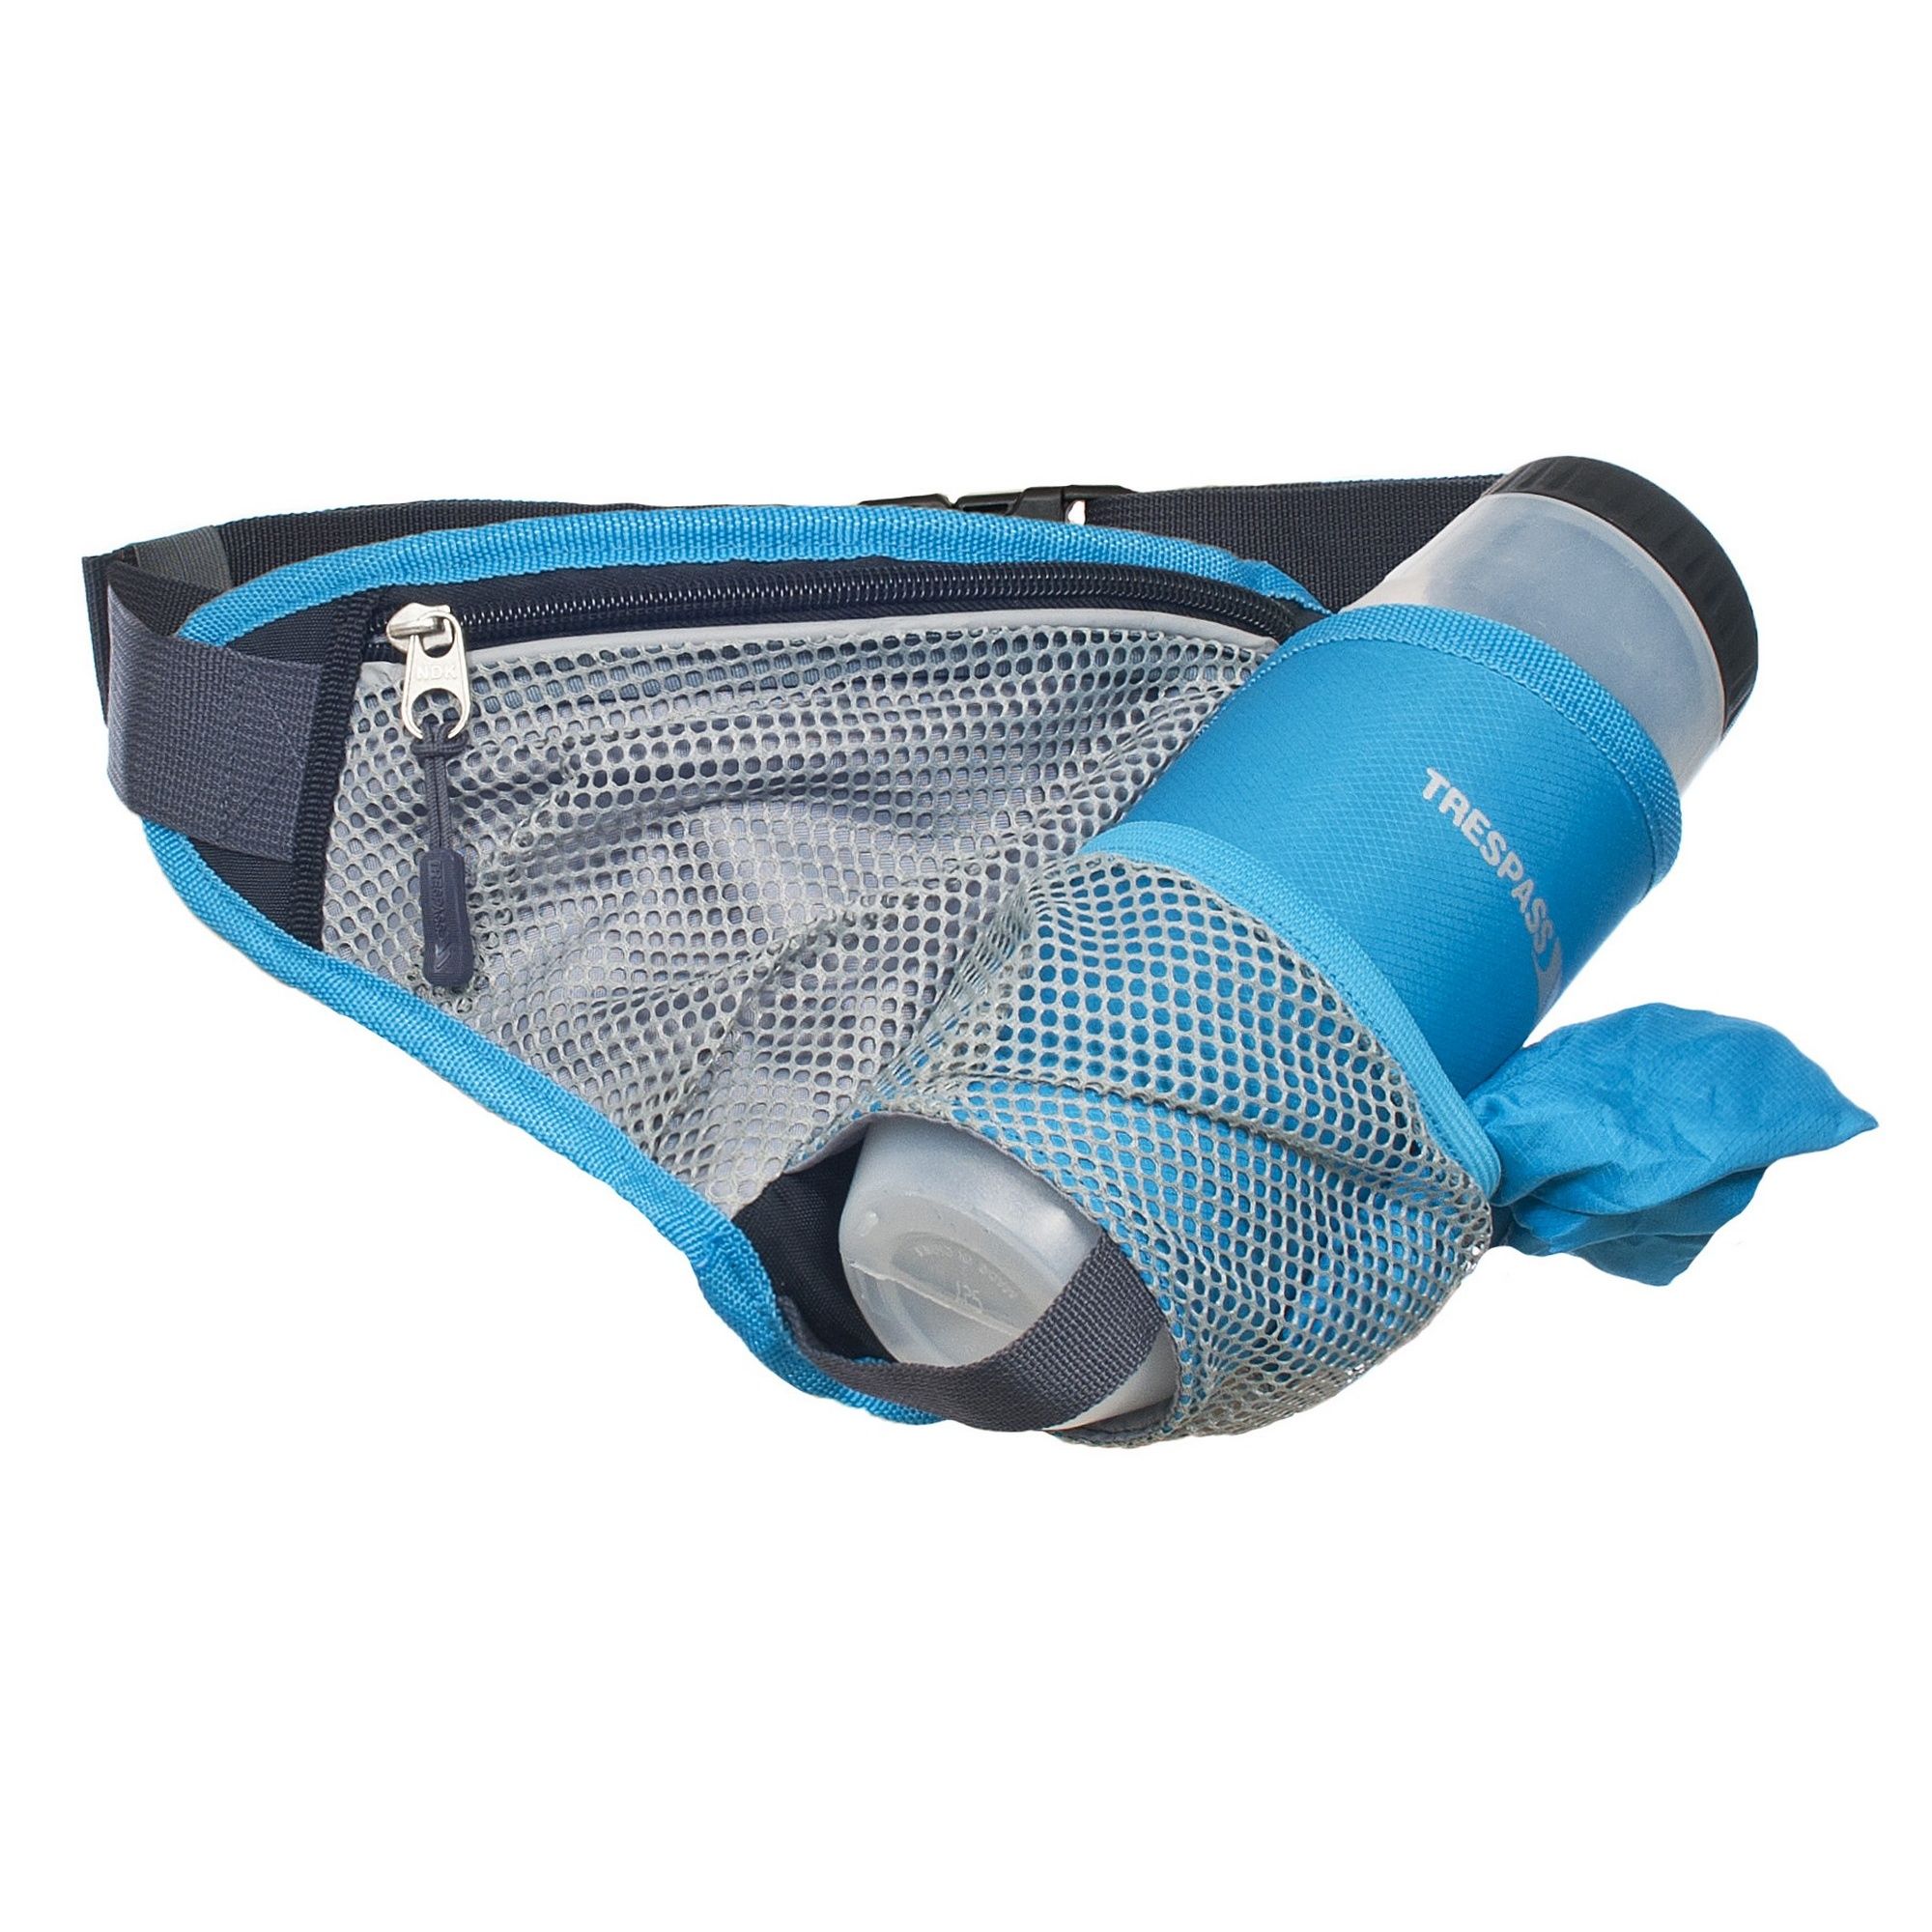 Sports bumbag. 1 Zipped compartment. 700ml BPA free sports bottle included. Detachable microfibre towel. Adjustable strap. Material: (bag) 100% 420D polyester ripstop, (bottle) 100% PCTG plastic.